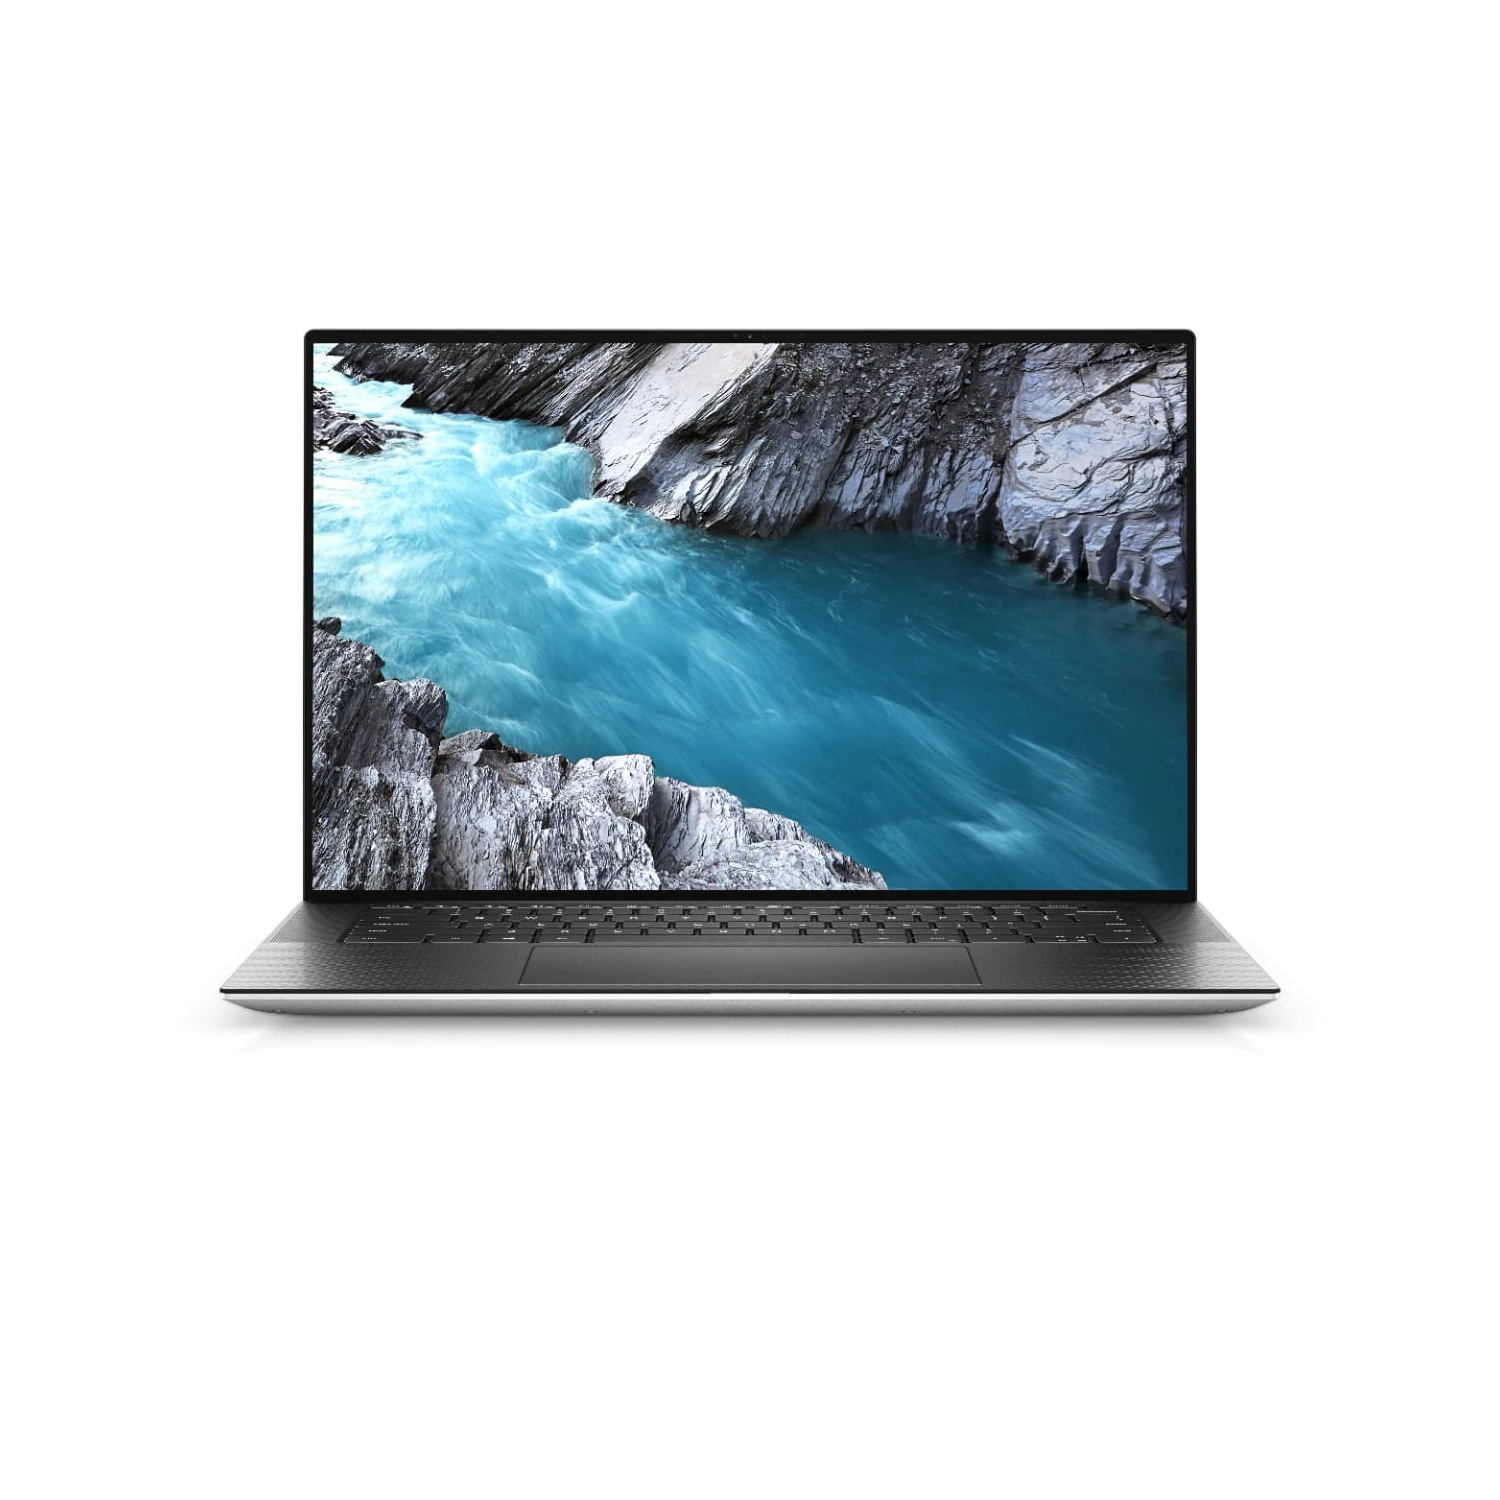 Refurbished (Excellent) - Dell XPS 15 9500 Laptop (2020) | 15" FHD+ | Core i7 - 2TB SSD - 64GB RAM - 1650 Ti | 6 Cores @ 5 GHz - 10th Gen CPU Certified Refurbished